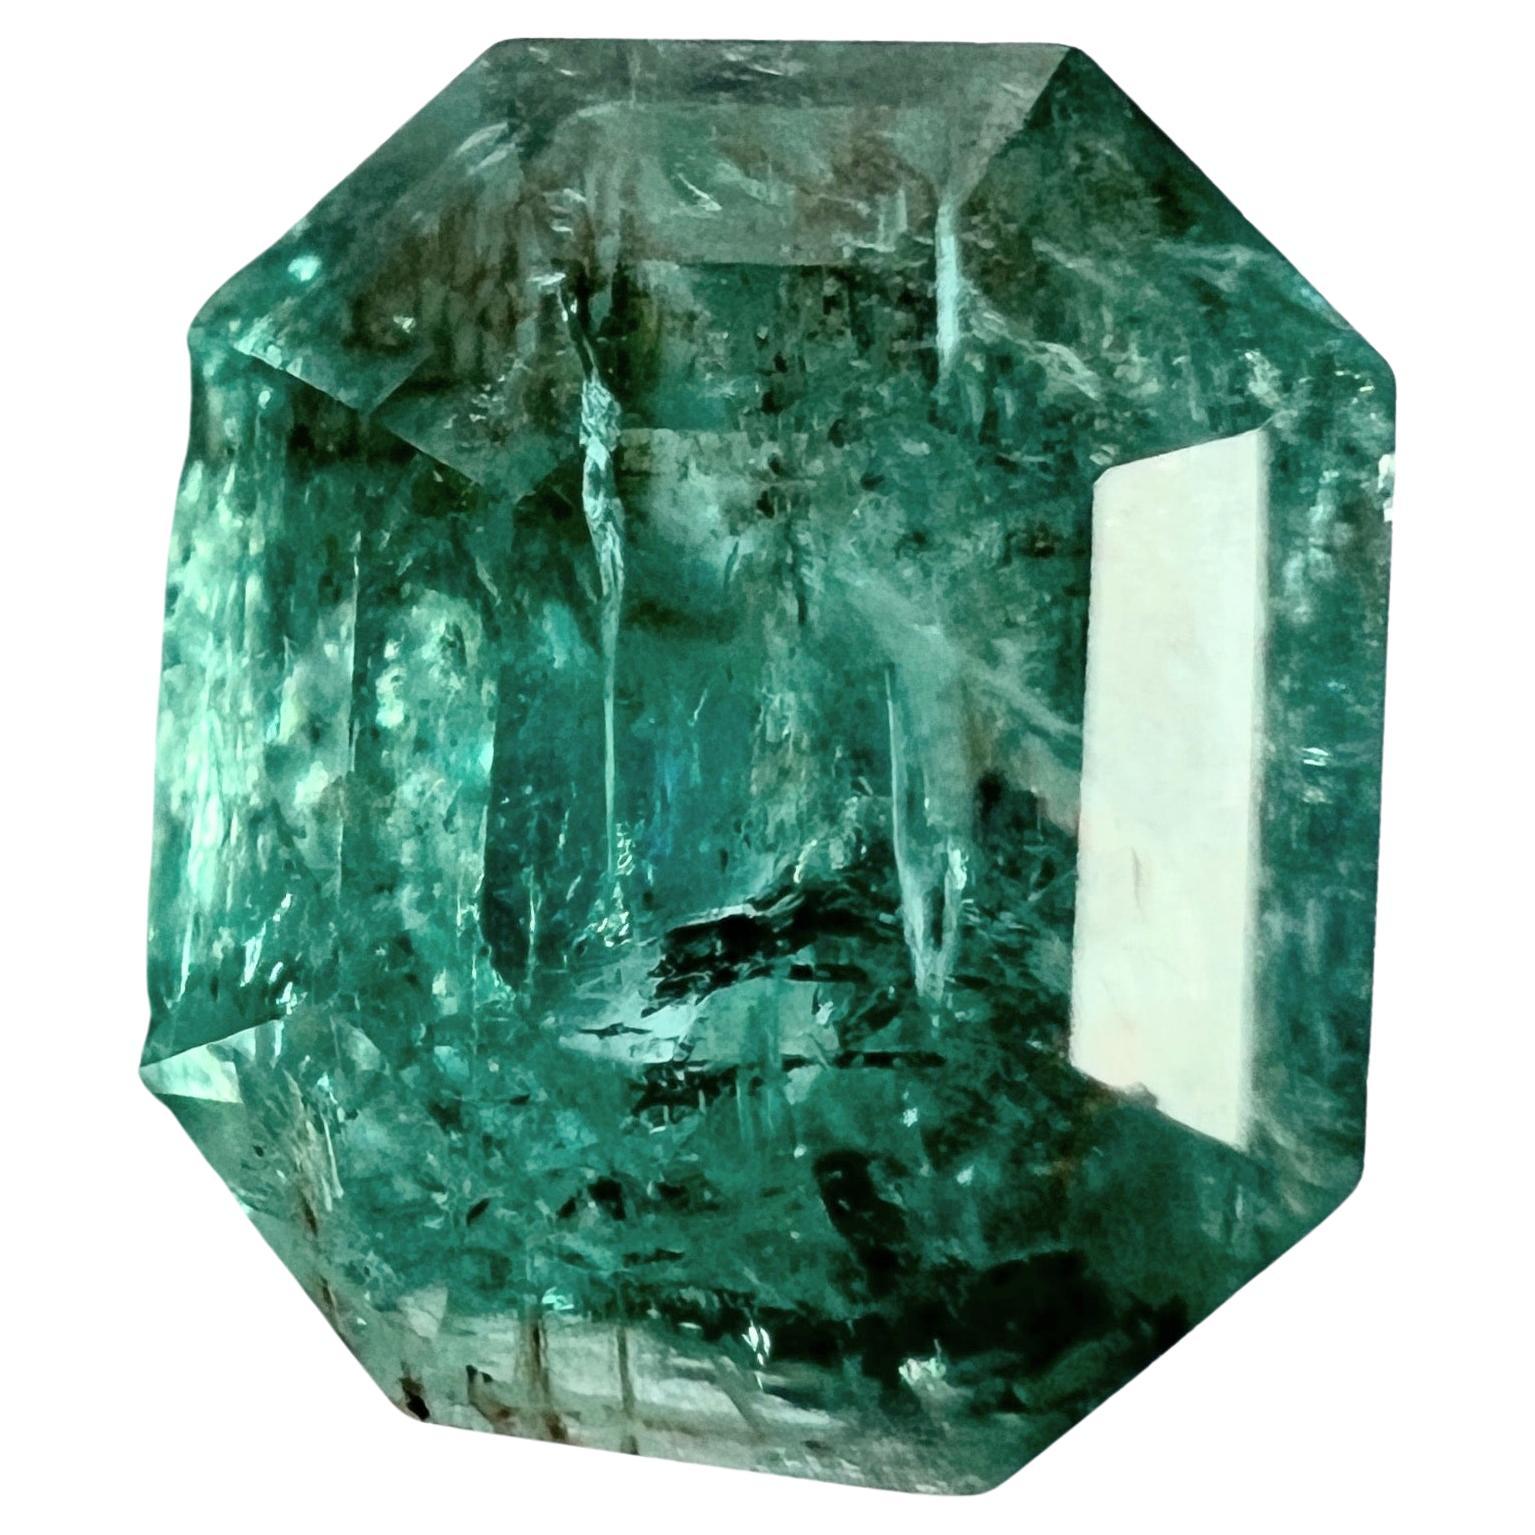 Take a look at this 6.5ct Non-Oil Natural Green Emerald Gemstone, a captivating faceted stone that marries amazing clarity with distinctive inclusions. This emerald is a celebration of nature's artistry, featuring a perfect fusion of mesmerizing